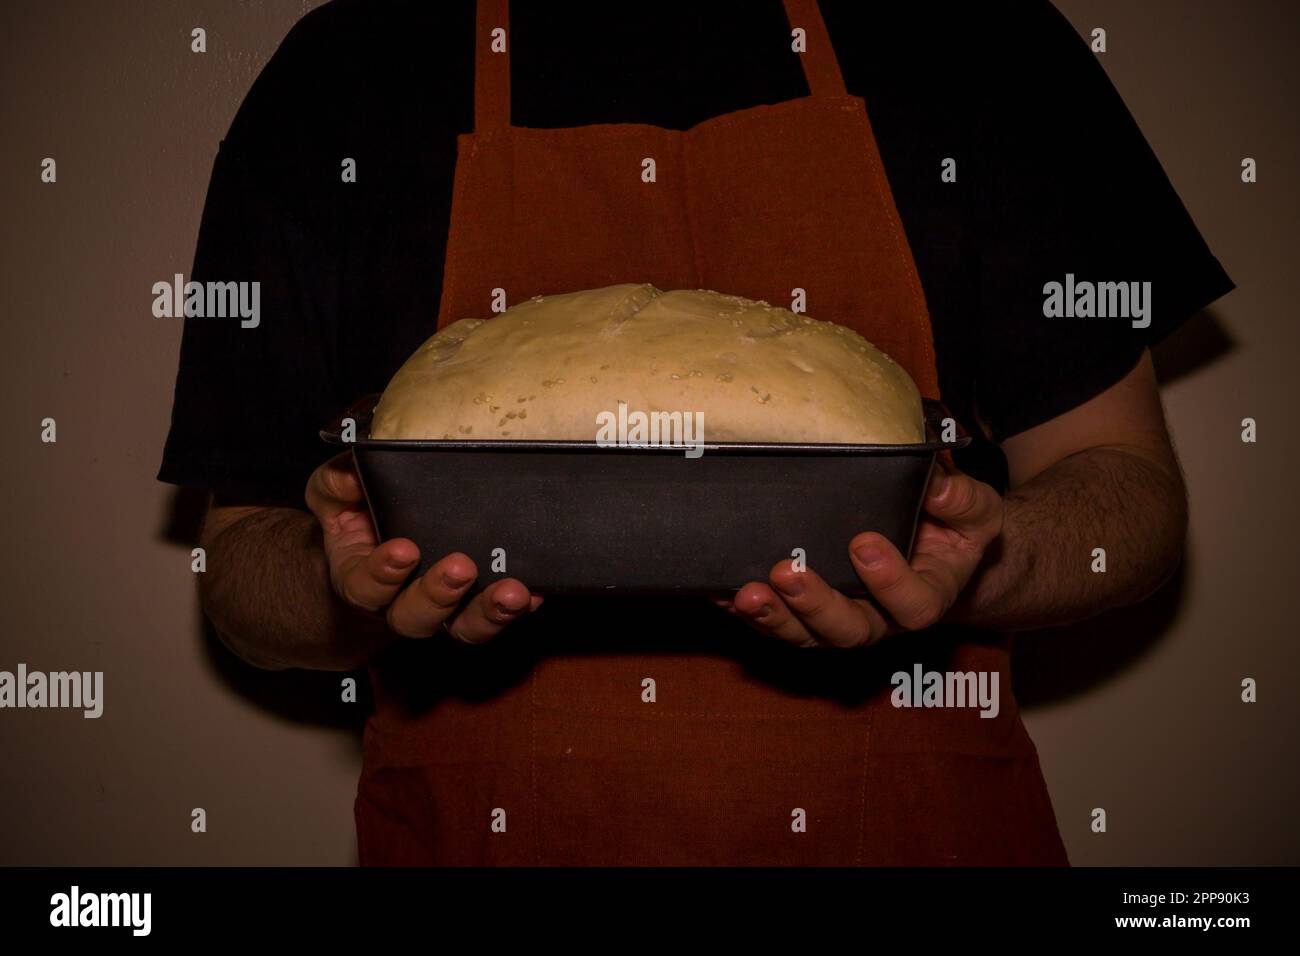 Baker in apron holding a homemade rised bread dough. An old-style home bakery. World cuisine - bread and bakery products Stock Photo